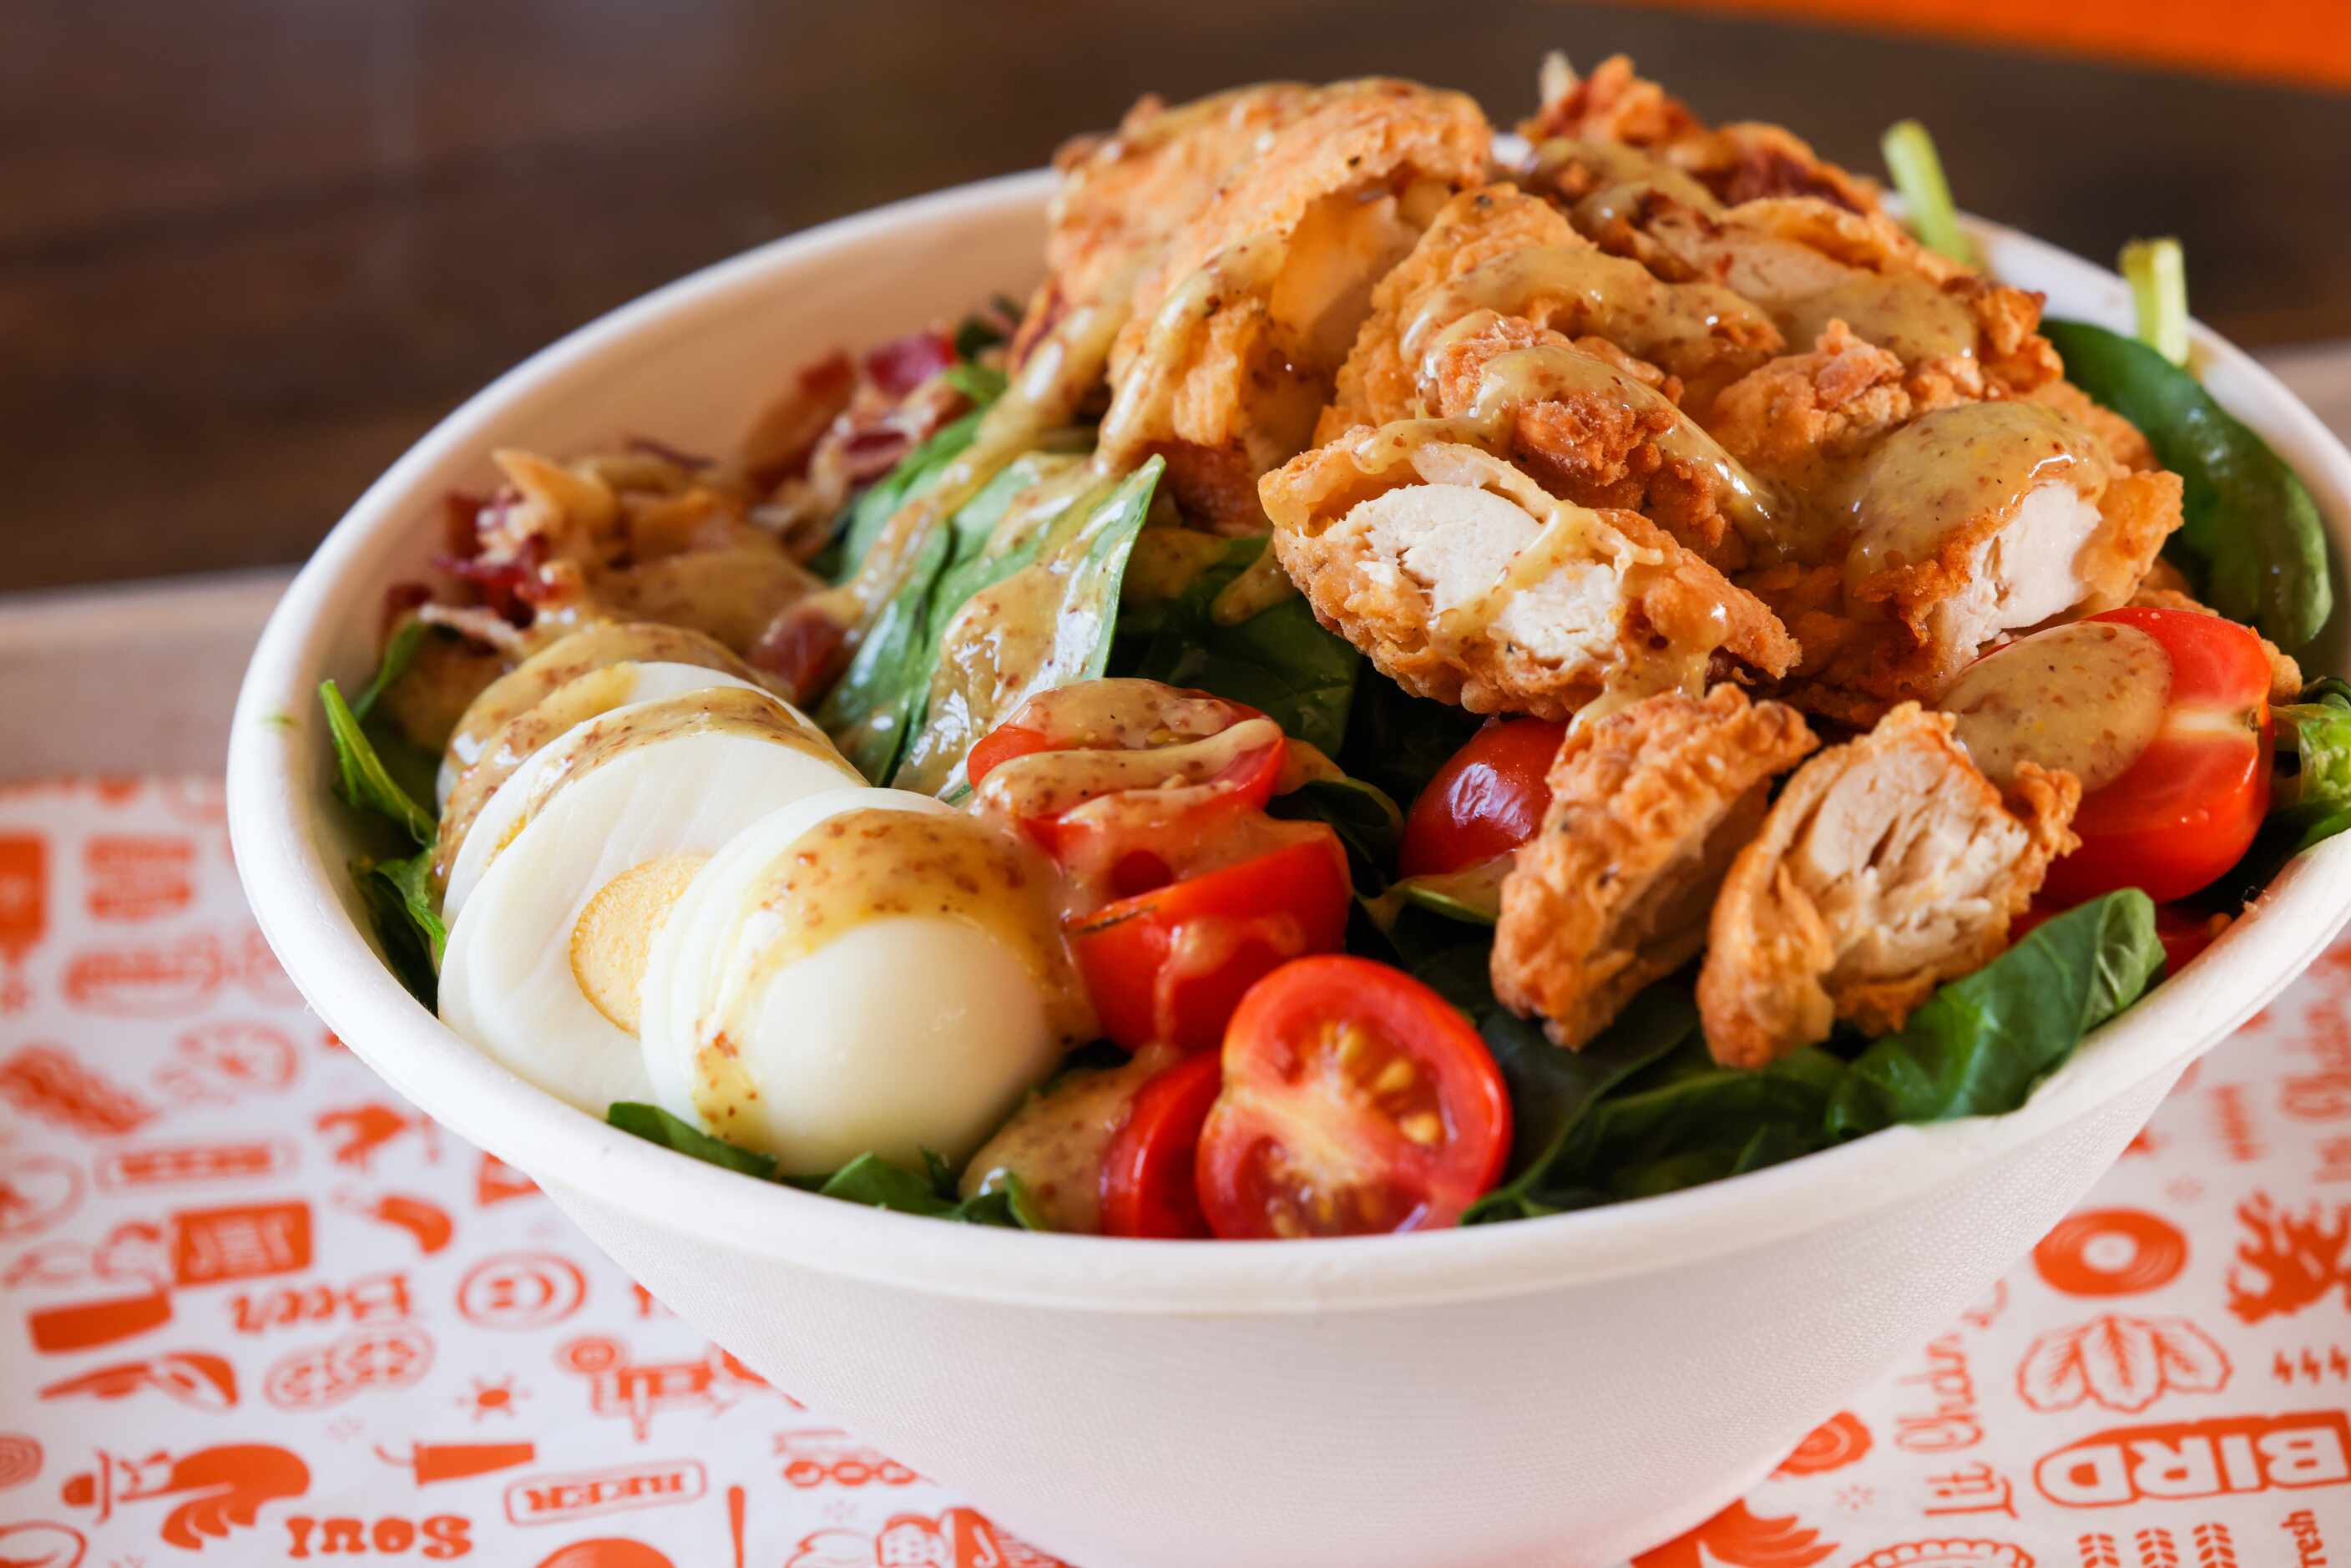 Soul Bird menu options include Chkn Shack salad, made with baby spinach, caramelized onions,...